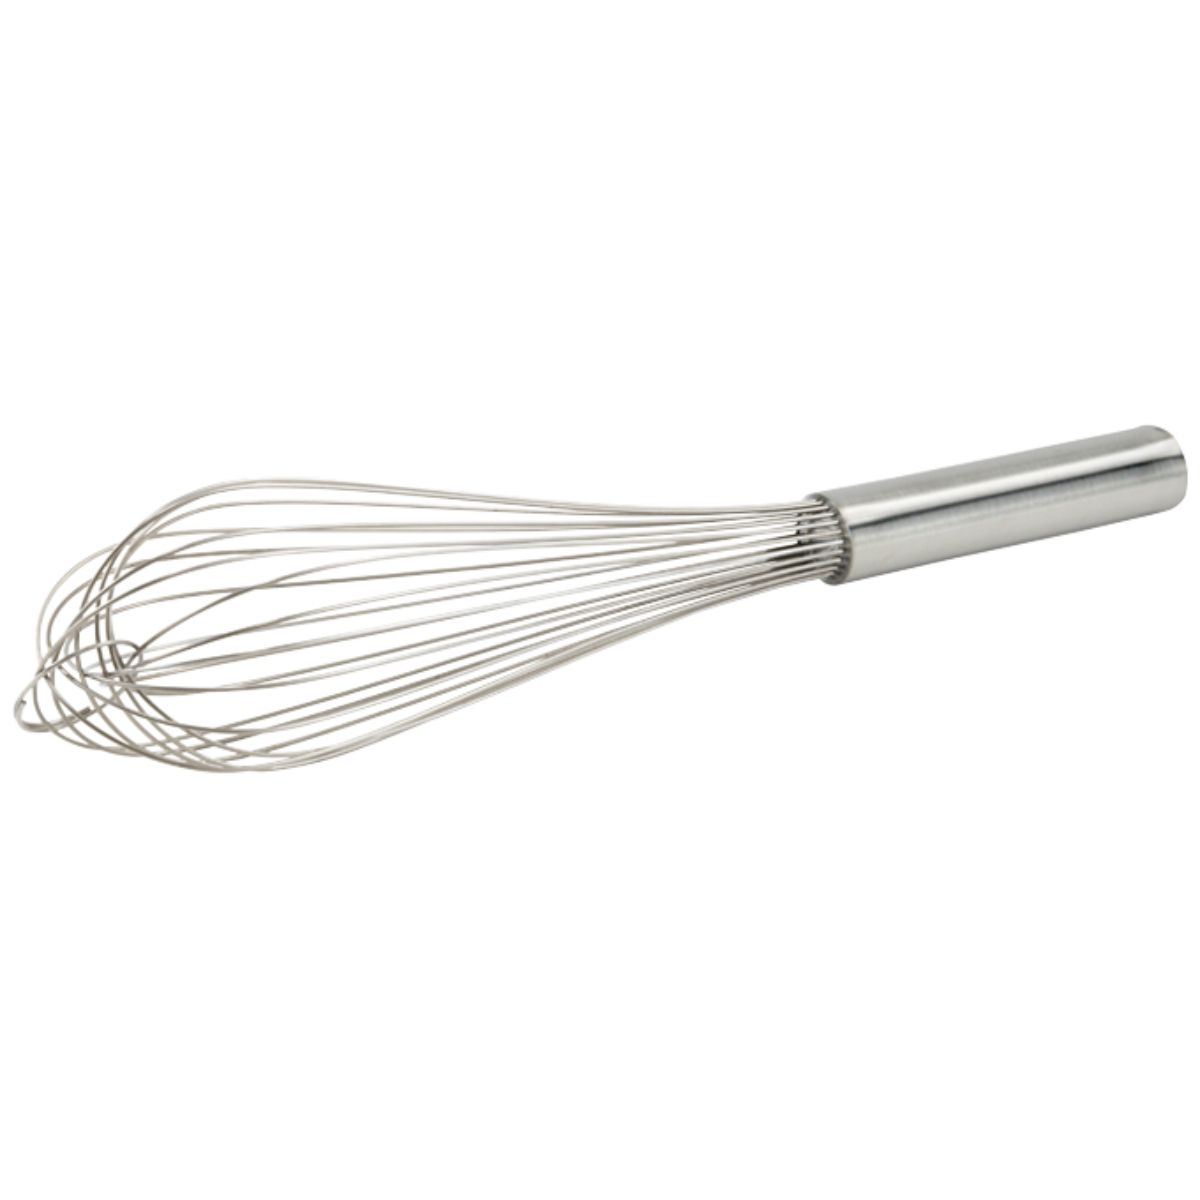 Mastrad Gourmet Whipper Silver - Spoons N Spice